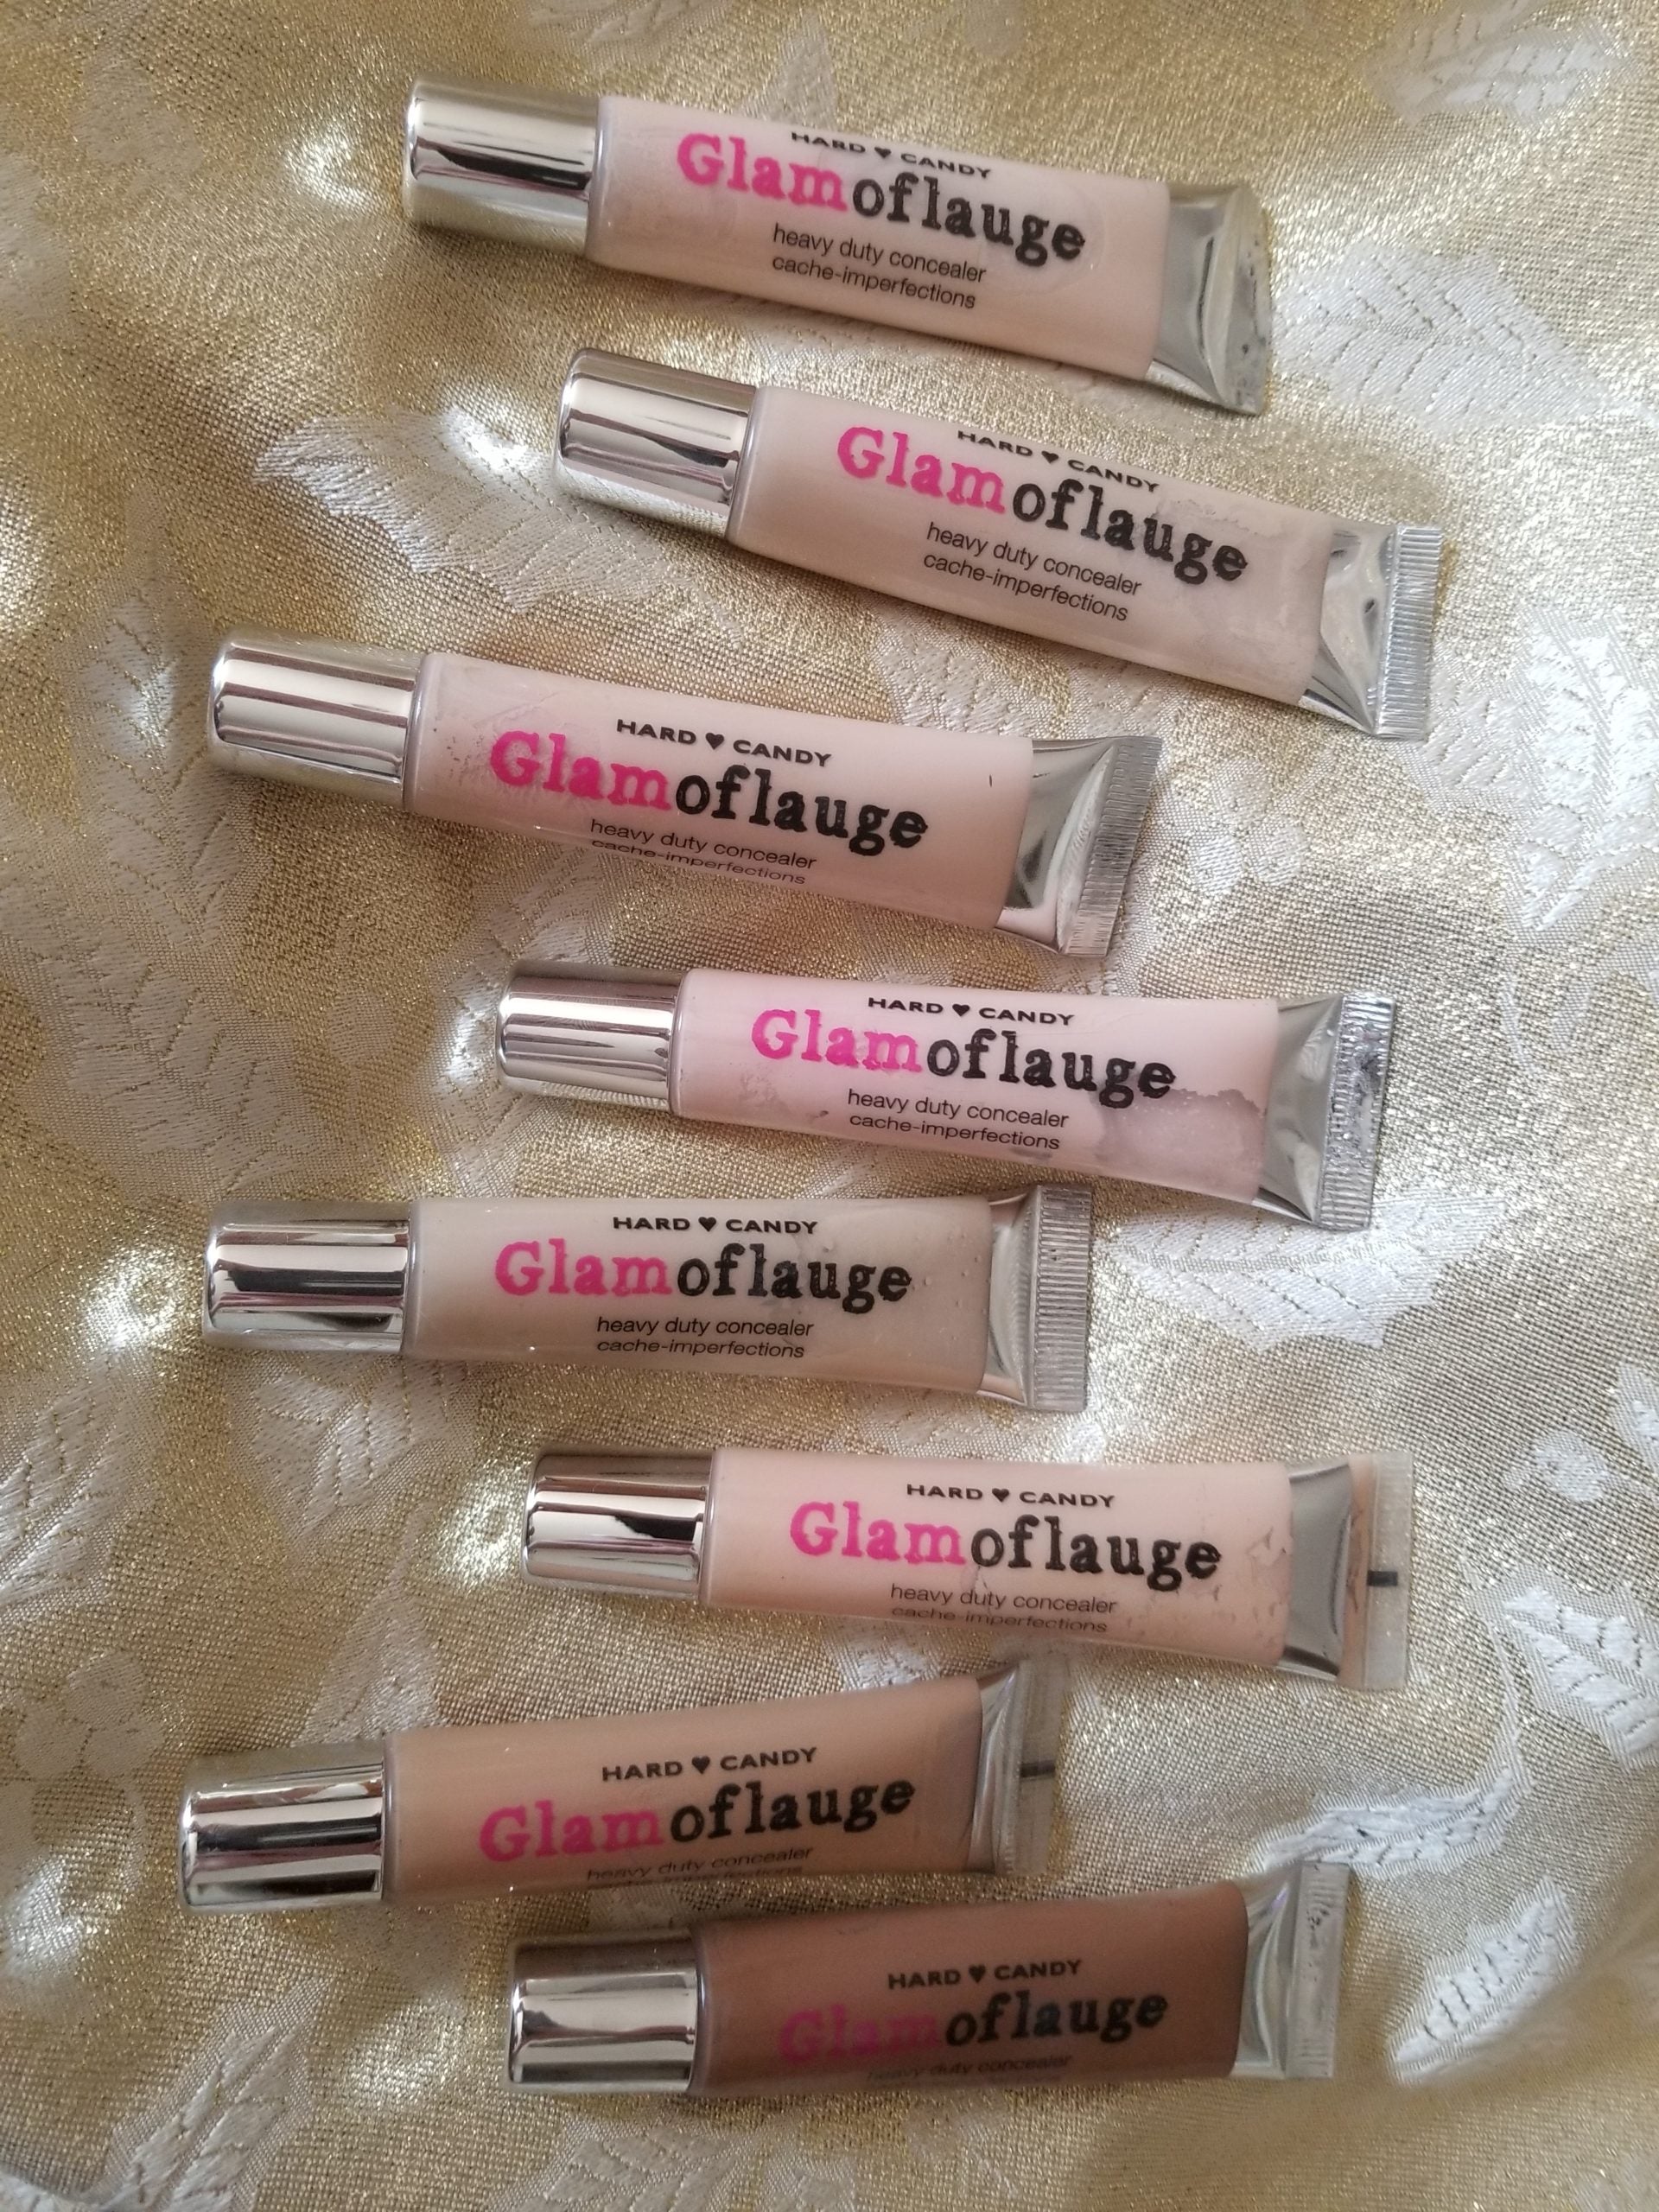 Review, Swatches, Photos, Makeup Trends 2018, 2019, 2020: Hard Candy Glamoflauge Concealer